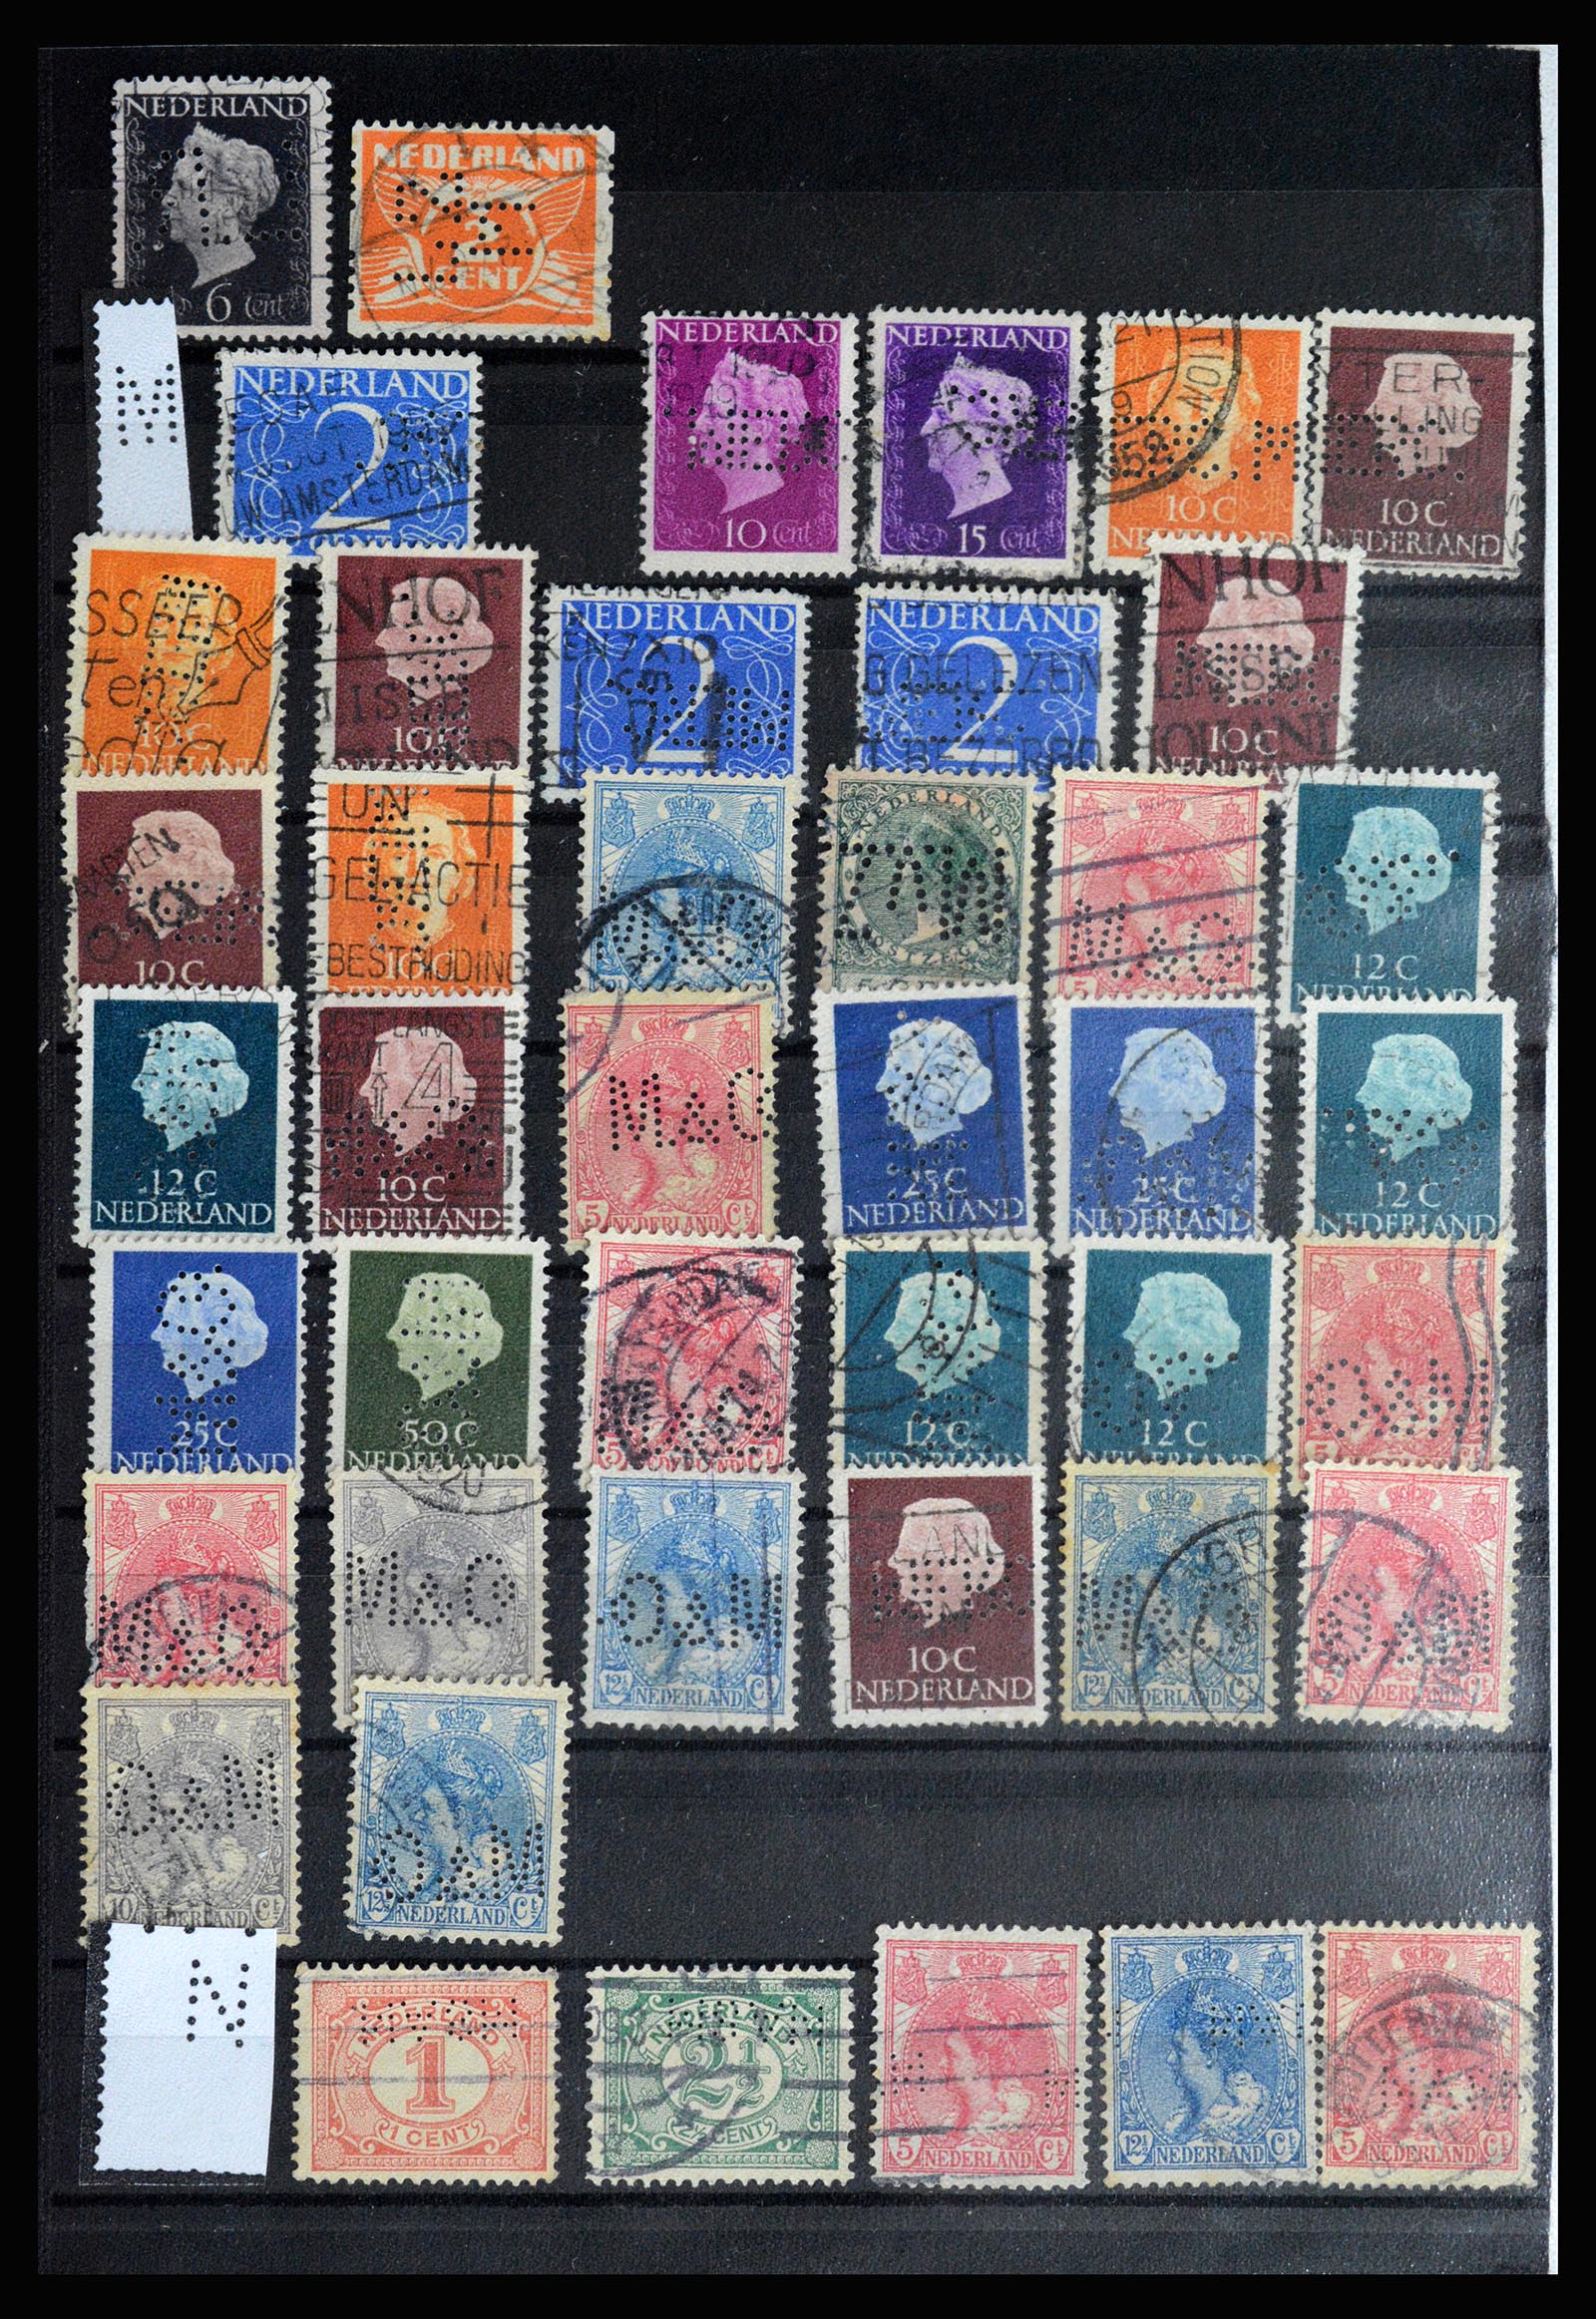 36849 017 - Stamp collection 36849 Netherlands perfins 1891-1960.